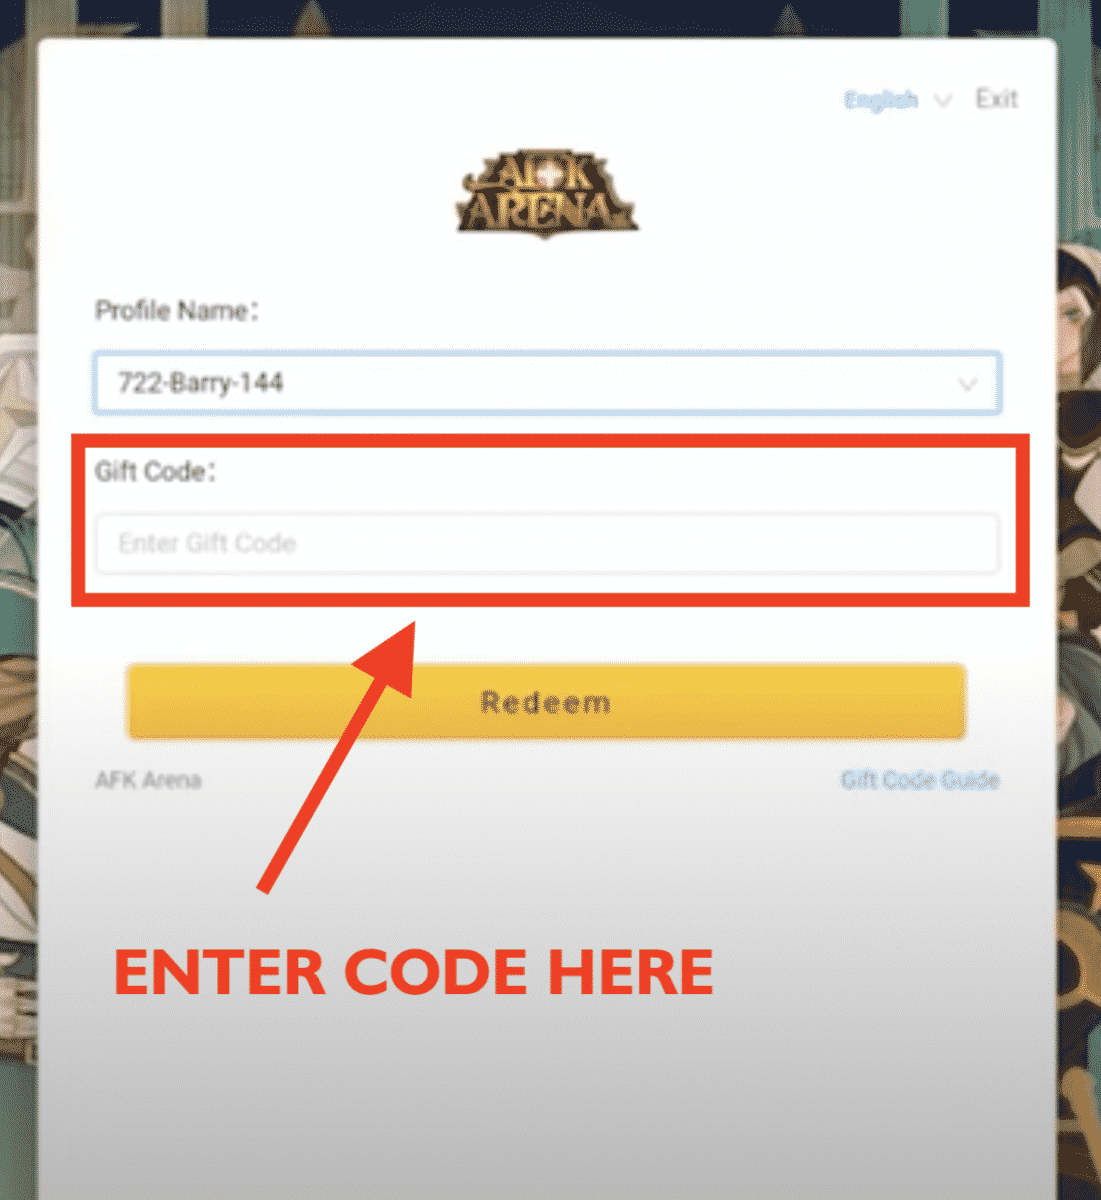 AFK Arena Where to Redeem Code